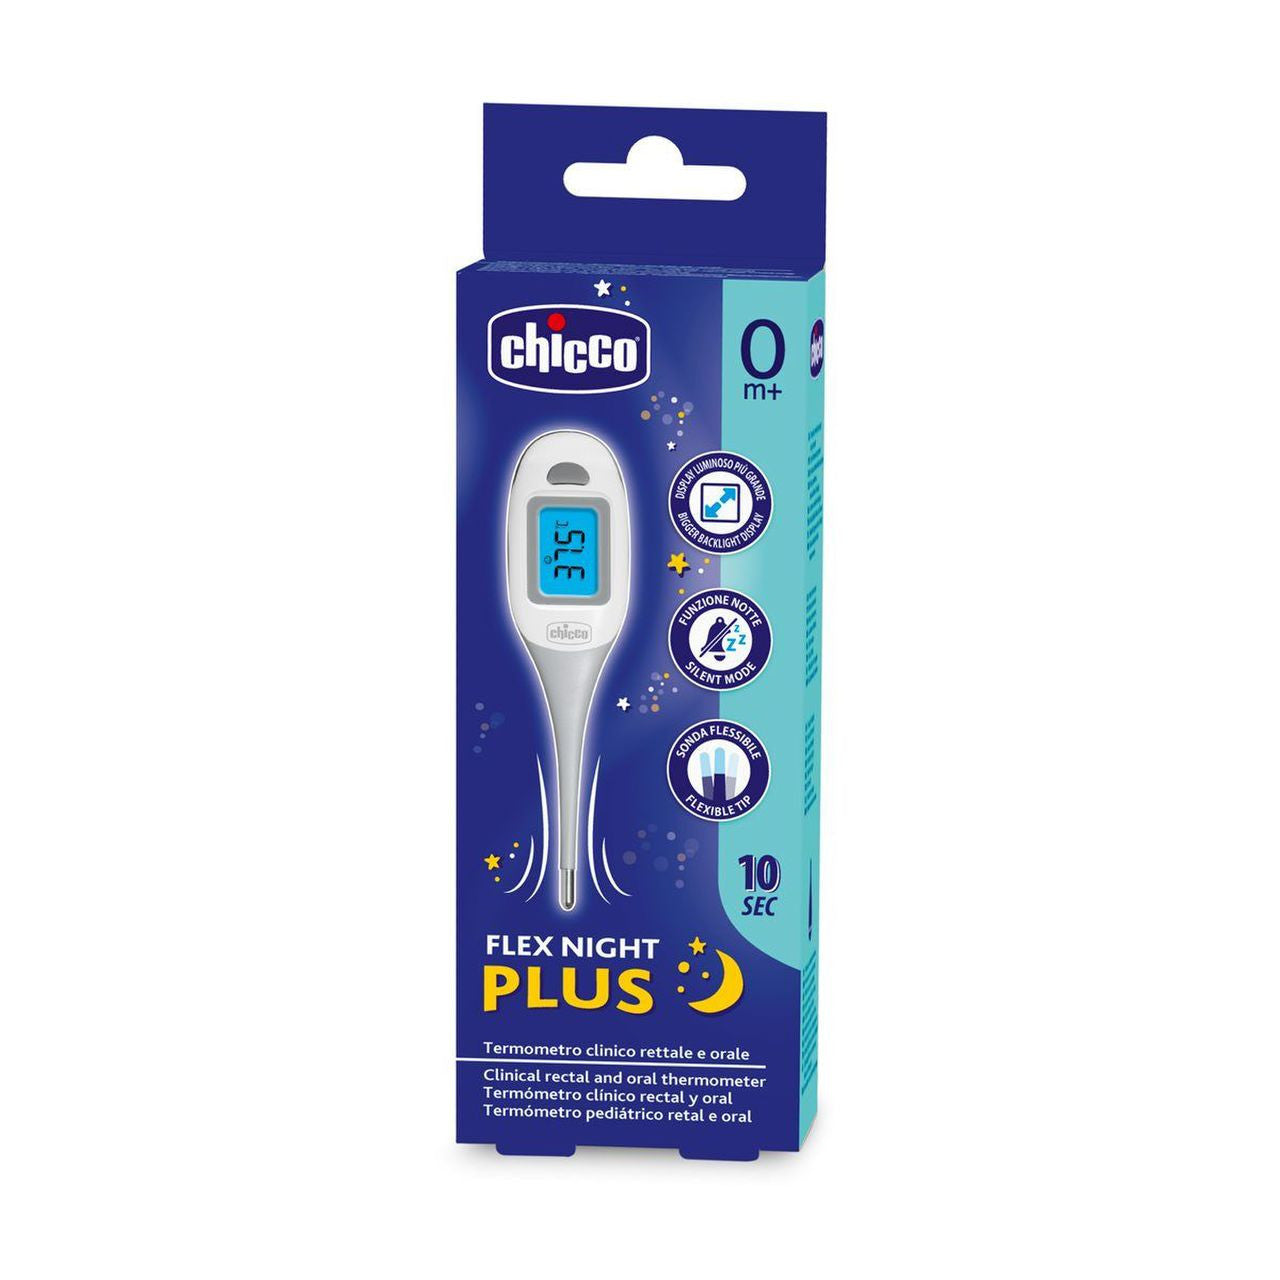 Chicco Flex Night Plus Thermometer - Tiny Tots Baby Store 